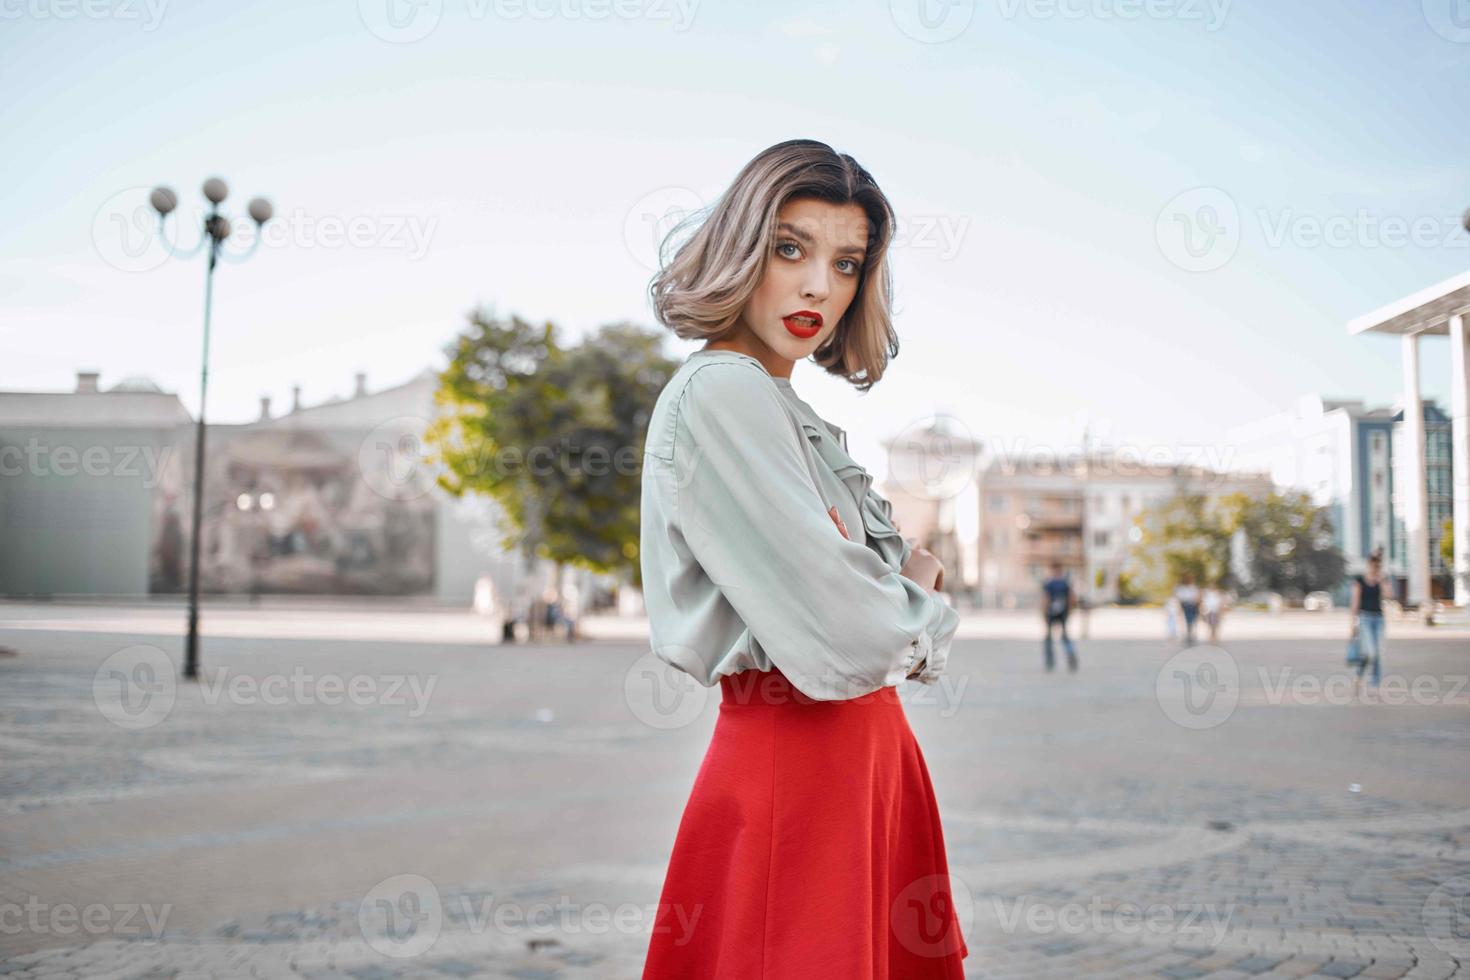 blonde in red skirt outdoors walking outdoors posing photo